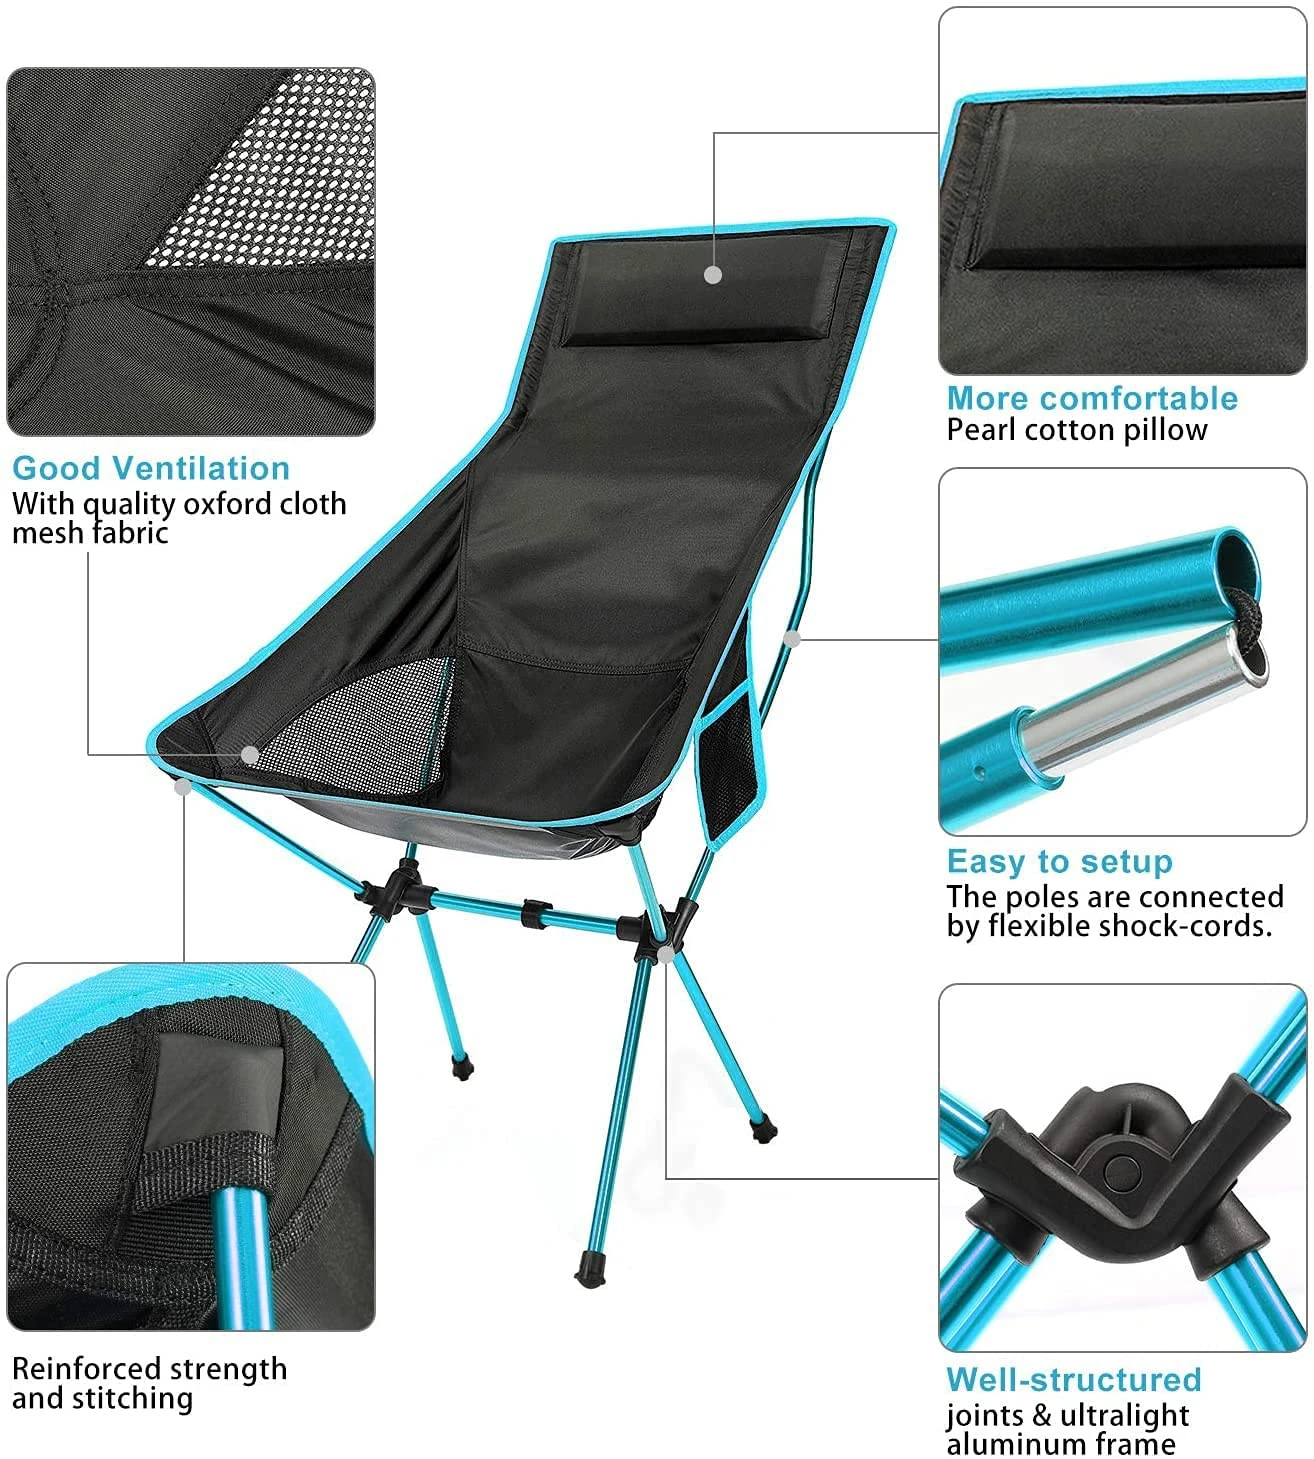 Outdoor Portable Camping Chair Oxford Cloth Folding Lengthen Camping Seat for Fishing BBQ Festival Picnic Beach Ultralight Chair 3